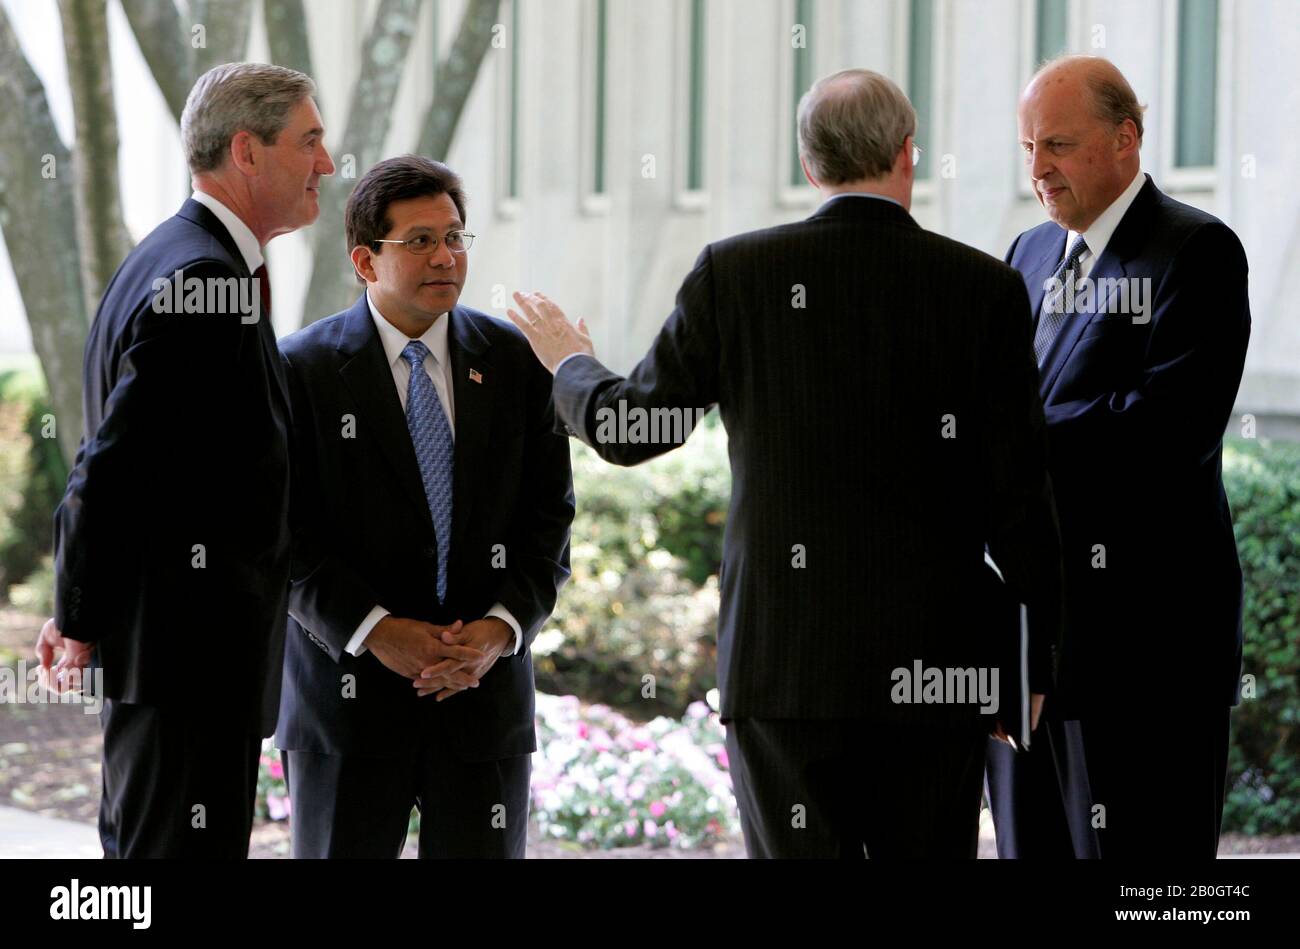 Langley, VA - May 31, 2006 -- Four of the top United States Justice Department and Intelligence officials, left to right: Federal Bureau of Investigation (FBI) Director Robert Mueller;  Attorney General Alberto Gonzales; National Security Advisor Stephen Hadley; and National Intelligence Director John Negroponte talk outside Central Intelligence Agency (CIA) headquarters following a ceremonial swearing in for new CIA Director General Michael Hayden in Langley, Virginia Wednesday 31 May 2006. Credit: Matthew Cavanaugh-Pool via CNP / MediaPunch Stock Photo